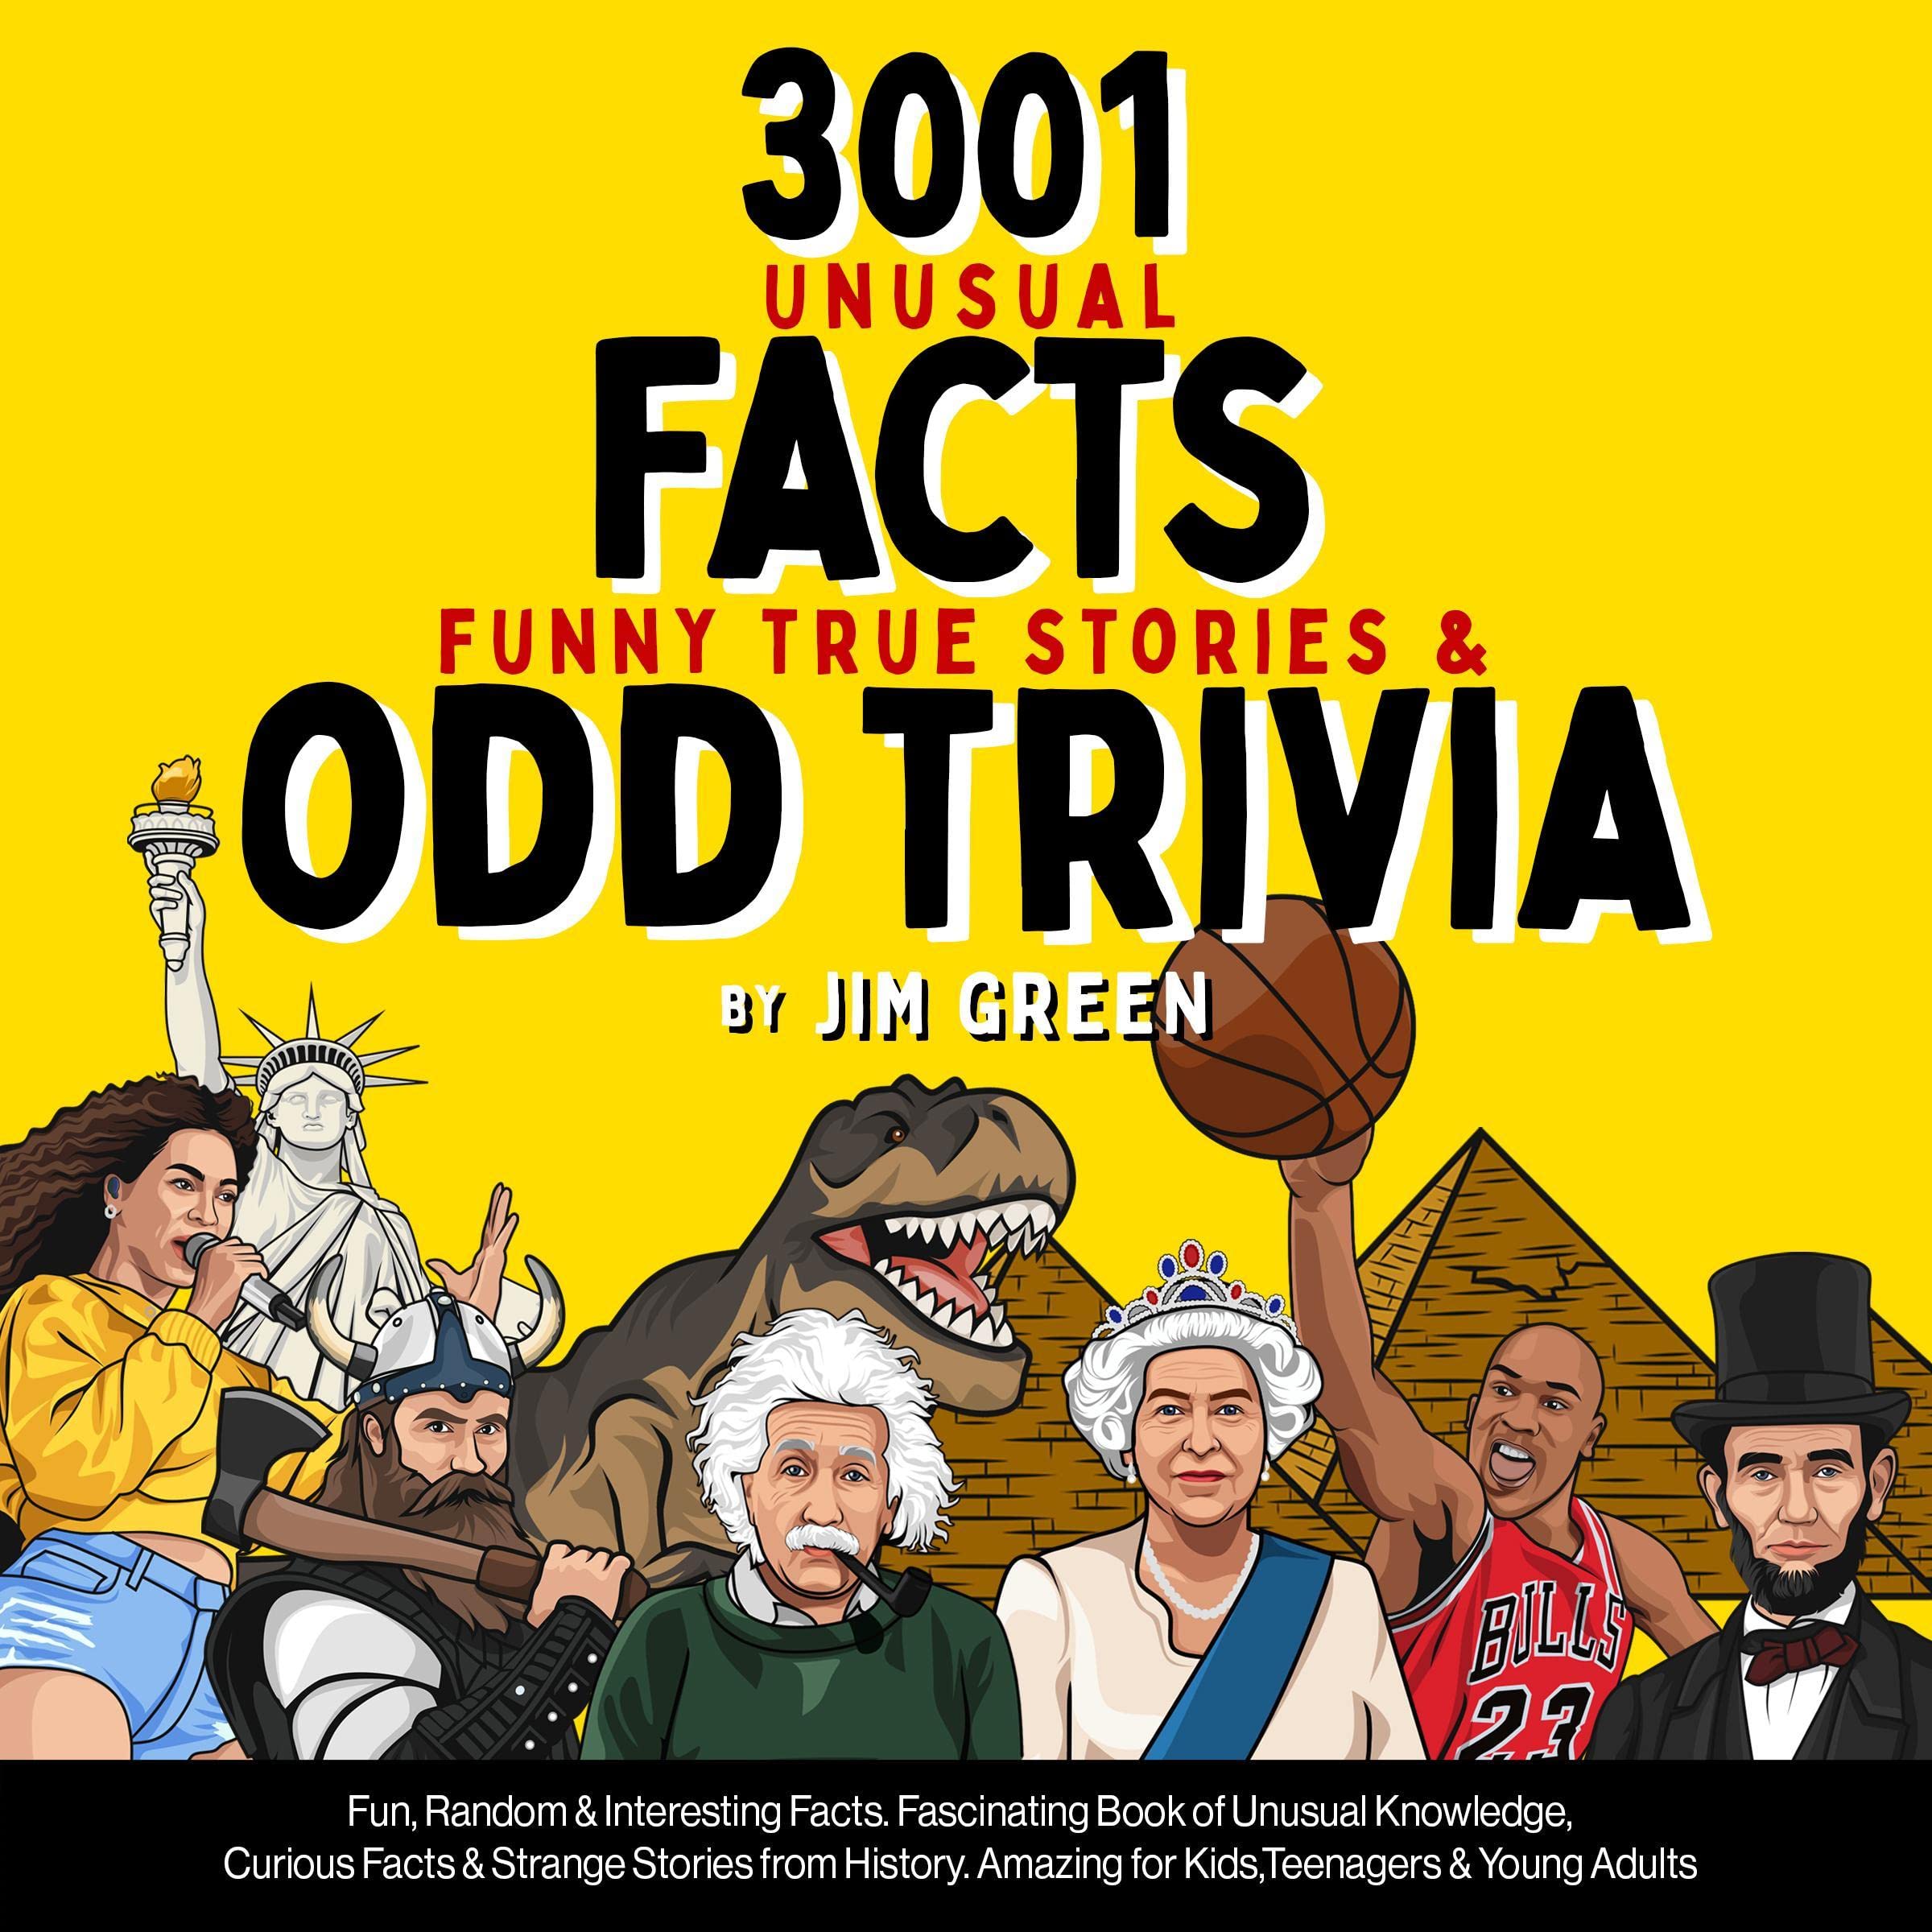 3001 Unusual Facts, Funny True Stories & Odd Trivia: Fun, Random & Interesting Facts. Fascinating Book of Unusual Knowledge, Curious Facts & Strange Stories from History. Amazing for Kids,Teenagers & Young Adults (children / teen boys & girls 12 - 15